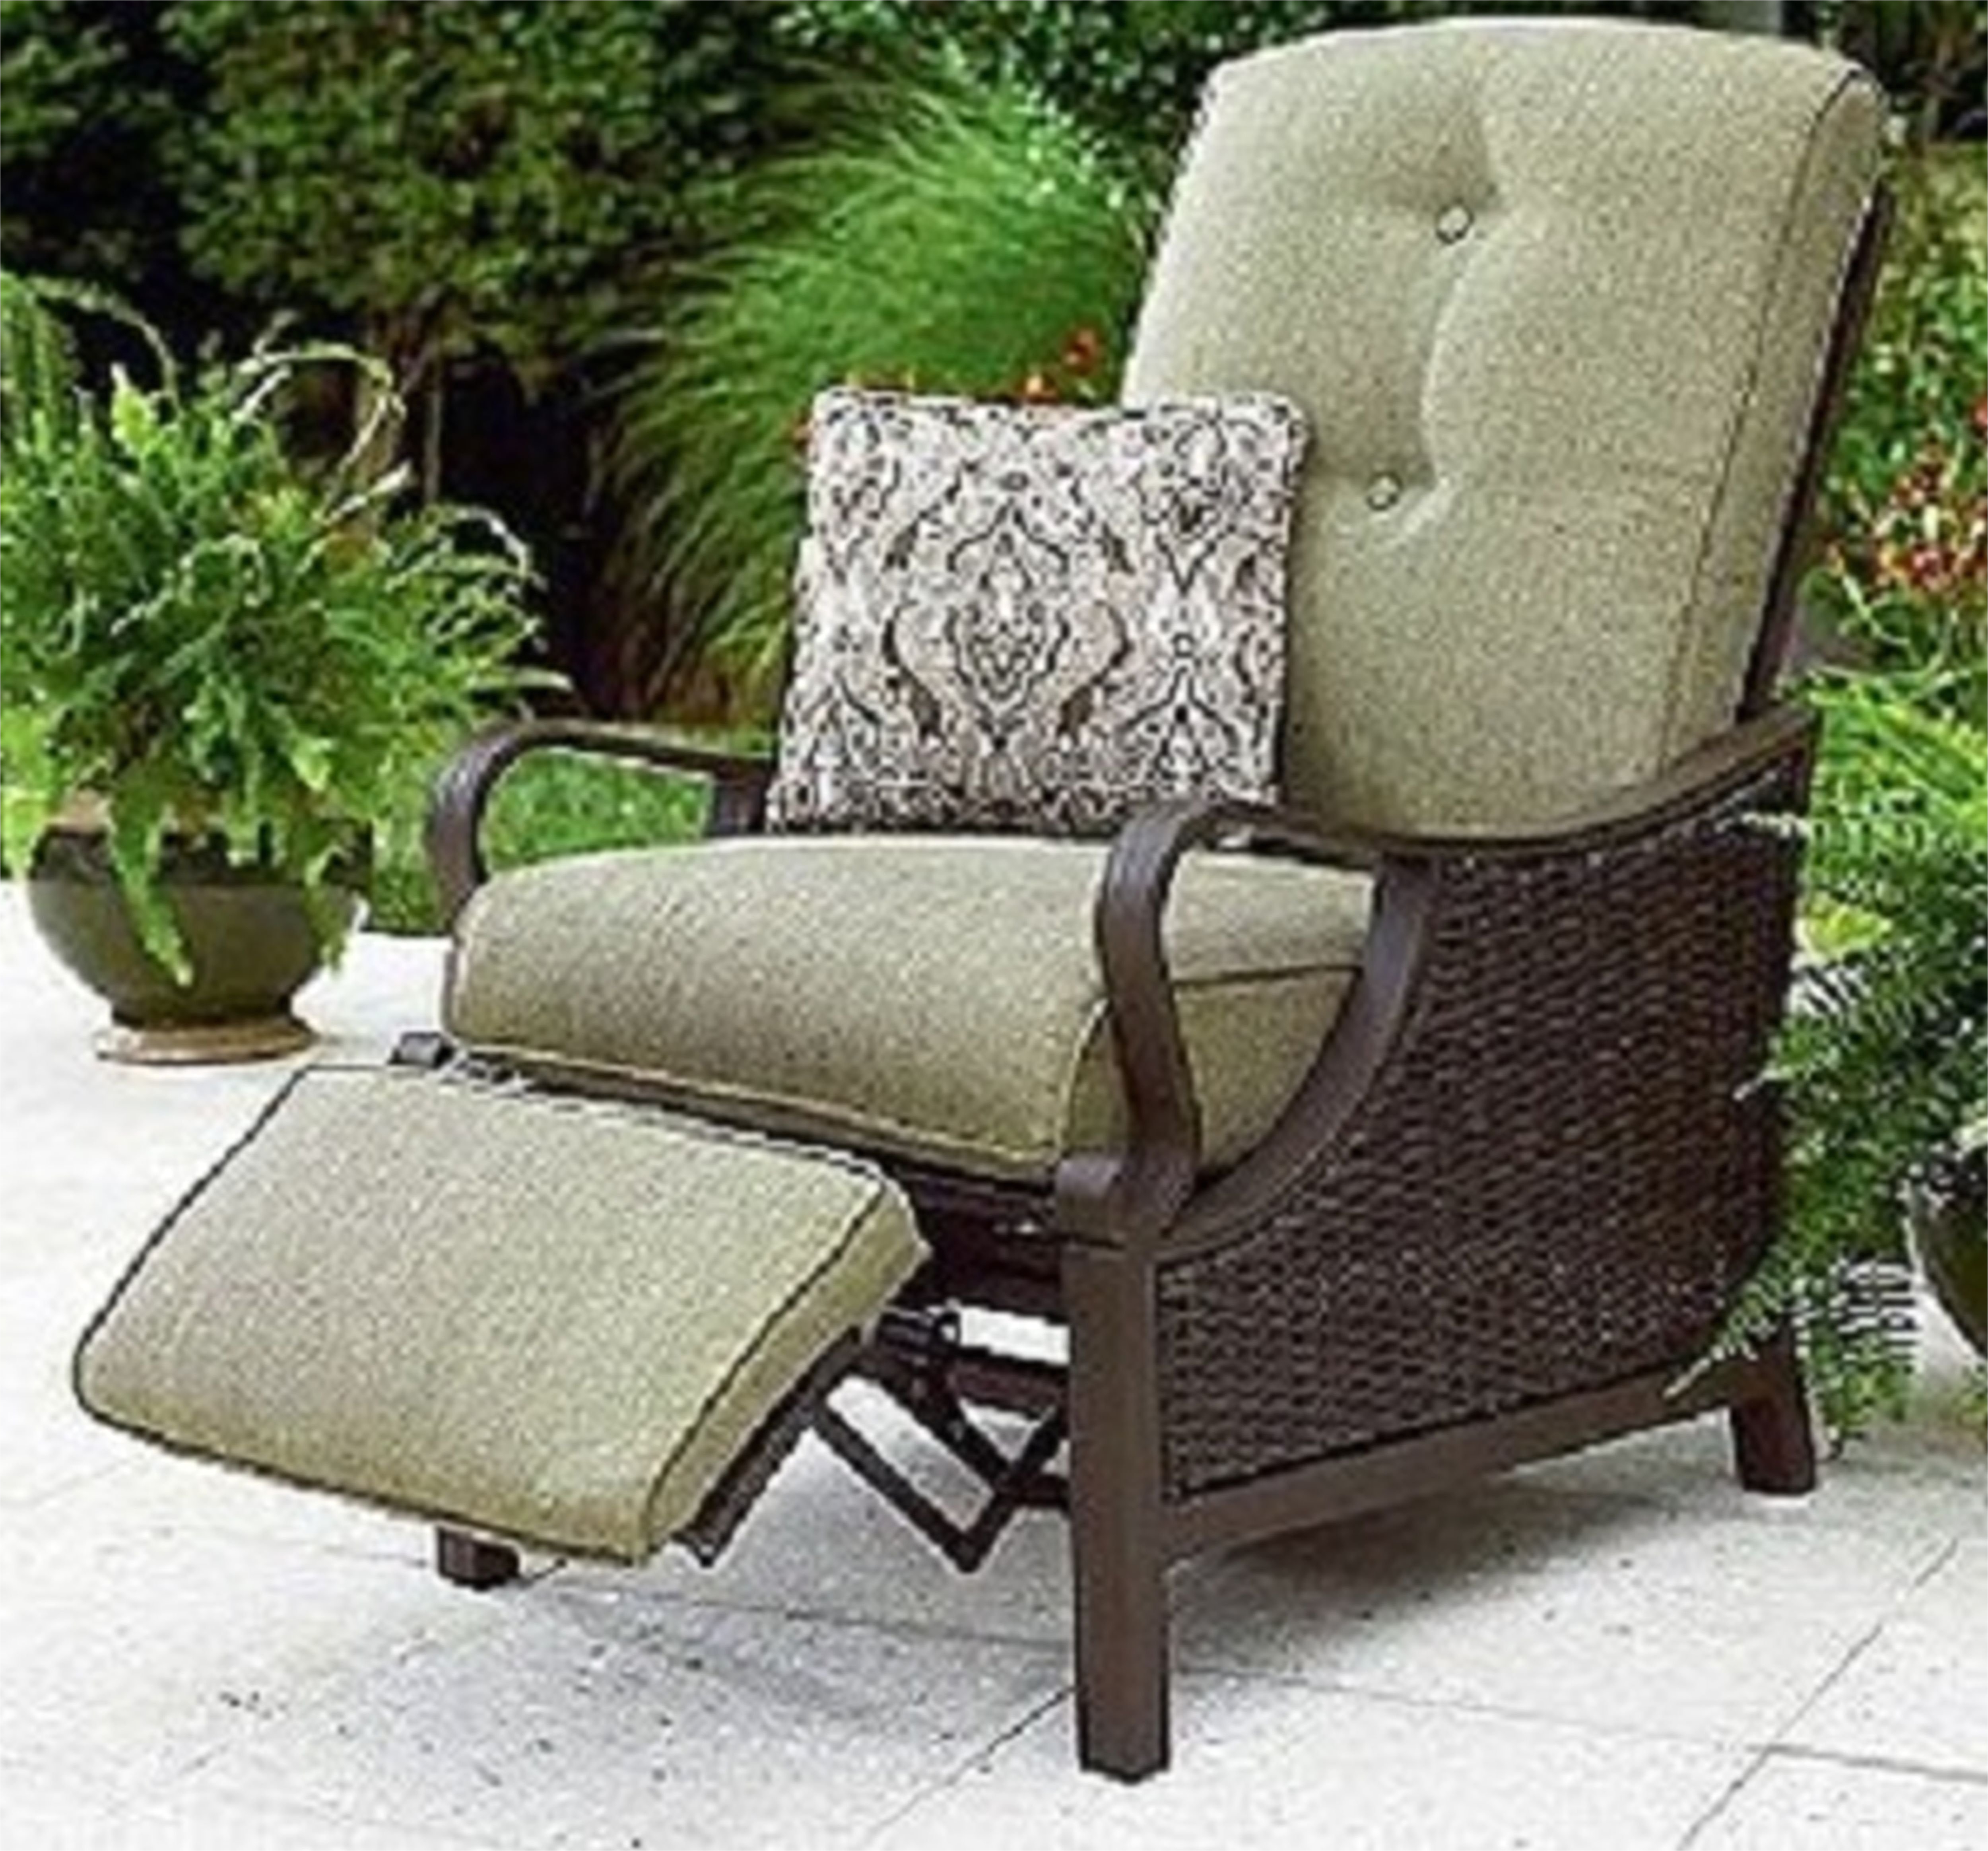 Lowes Outside Chairs Outdoor Furnitures How to Make Chair Cushions with Piping Awesome